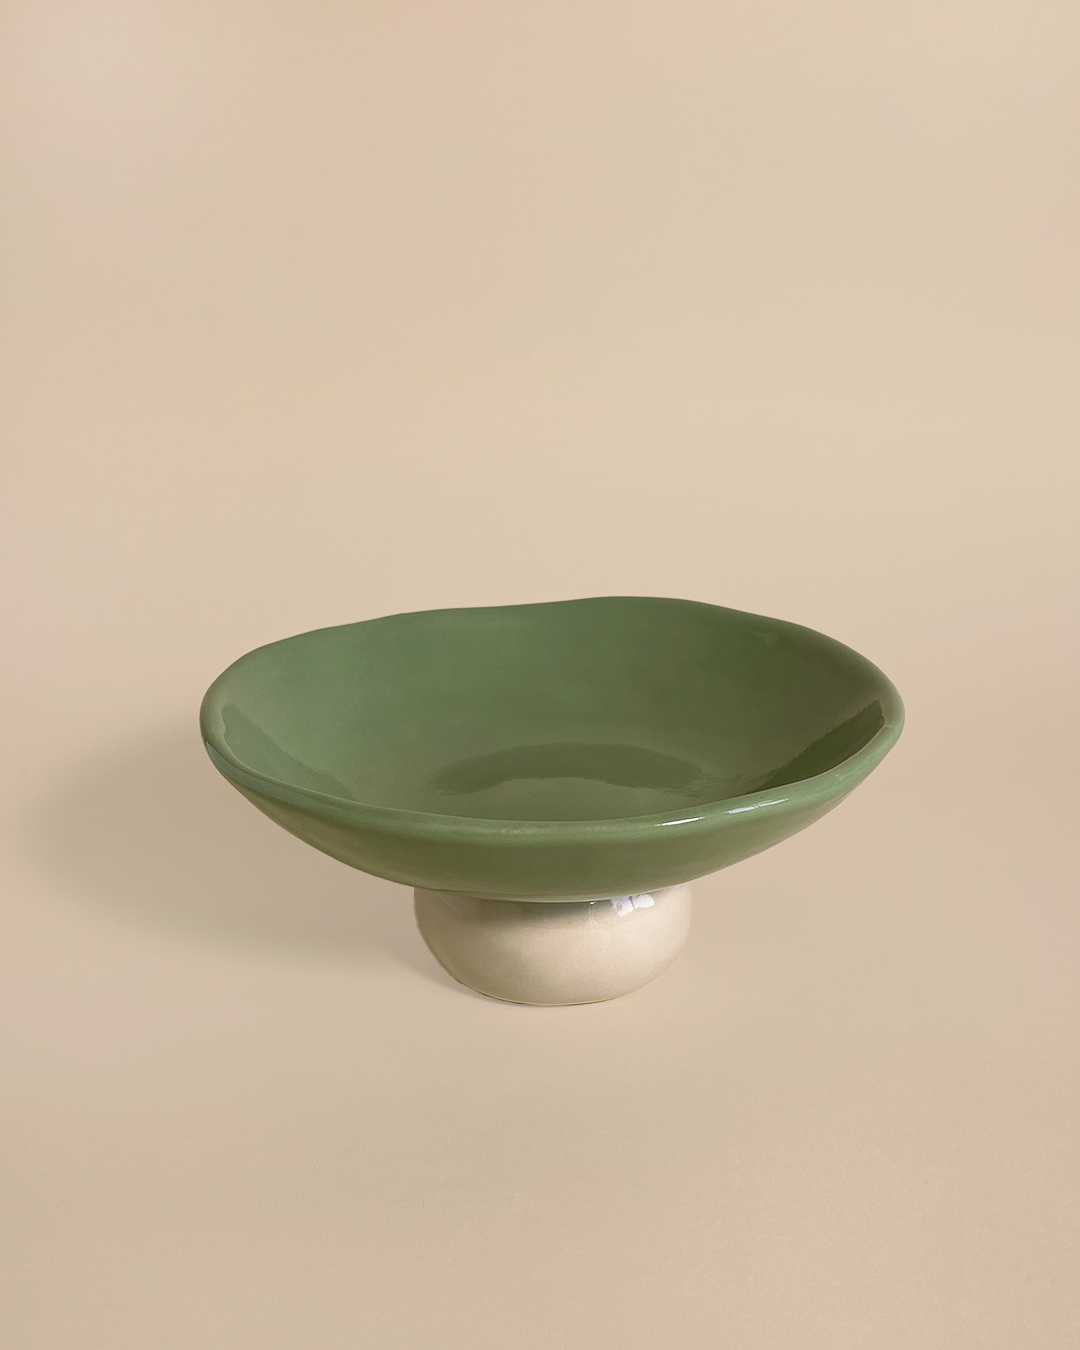 This handmade ceramic bowl by Atelier Borekull unites playfulness and simplicity. The organic, hand-formed shape and color combinations add a certain uniqueness to this decorative element. The „Marianne“ bowl makes fruits, a fancy salad or jewelry look even better.